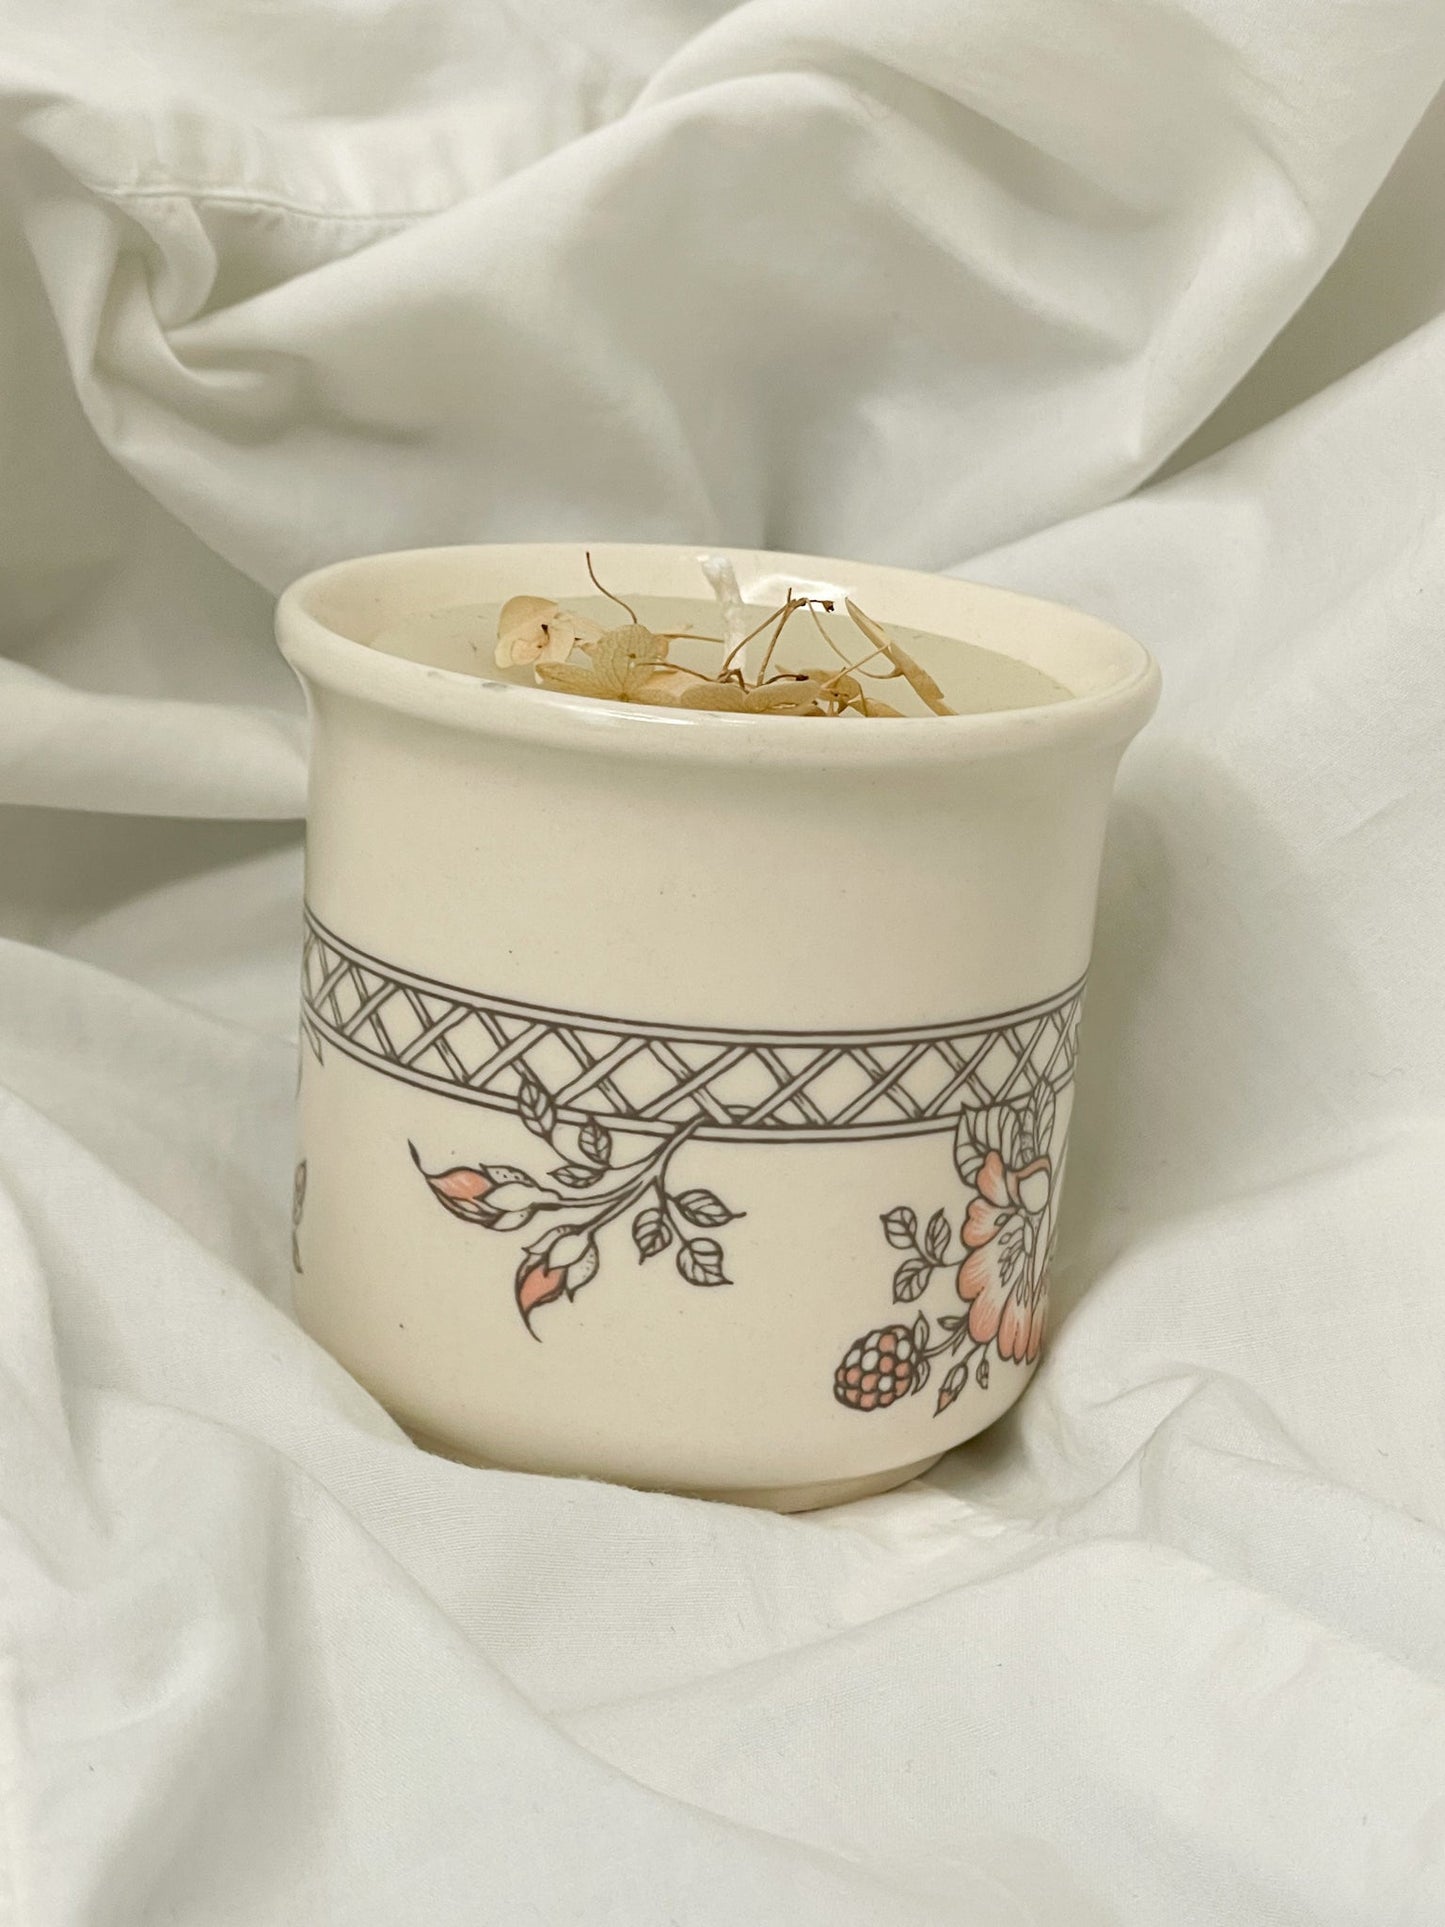 Floral Lattice Grey and Pink 100% Beeswax Mug Candle - Clarity Floral Citrus Scent